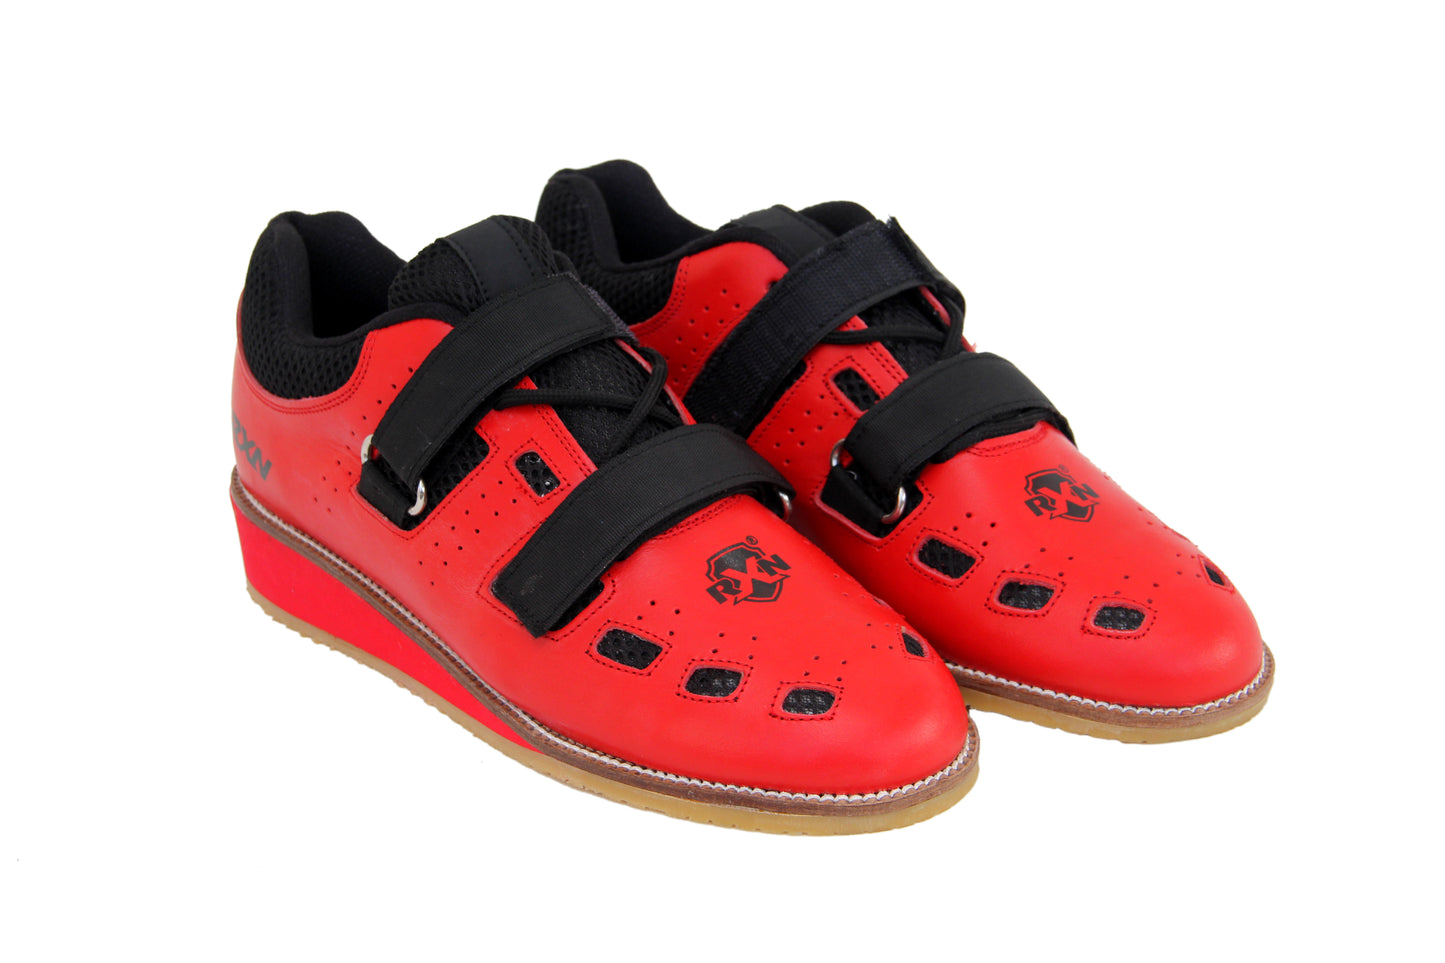 RXN World Star Weightlifting Shoes - RXN SPORTS